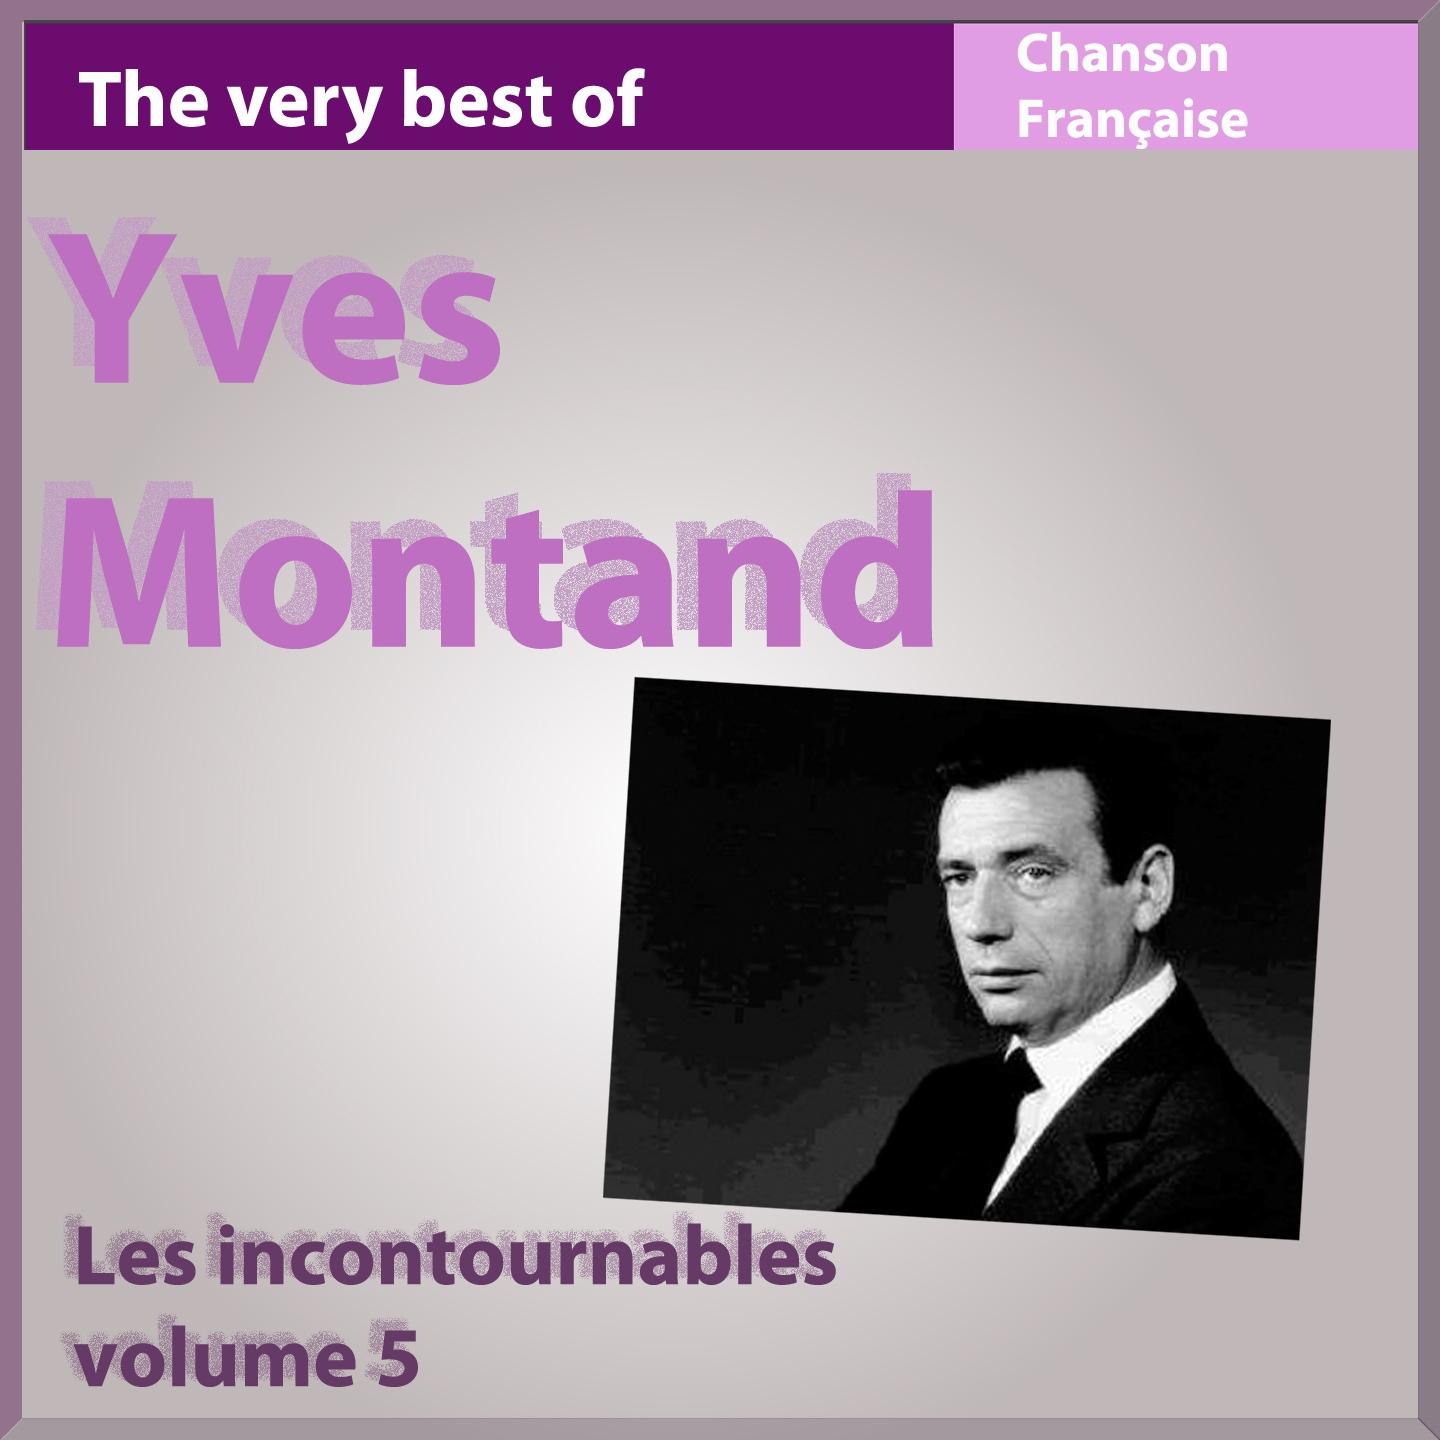 The Very Best of Yves Montand